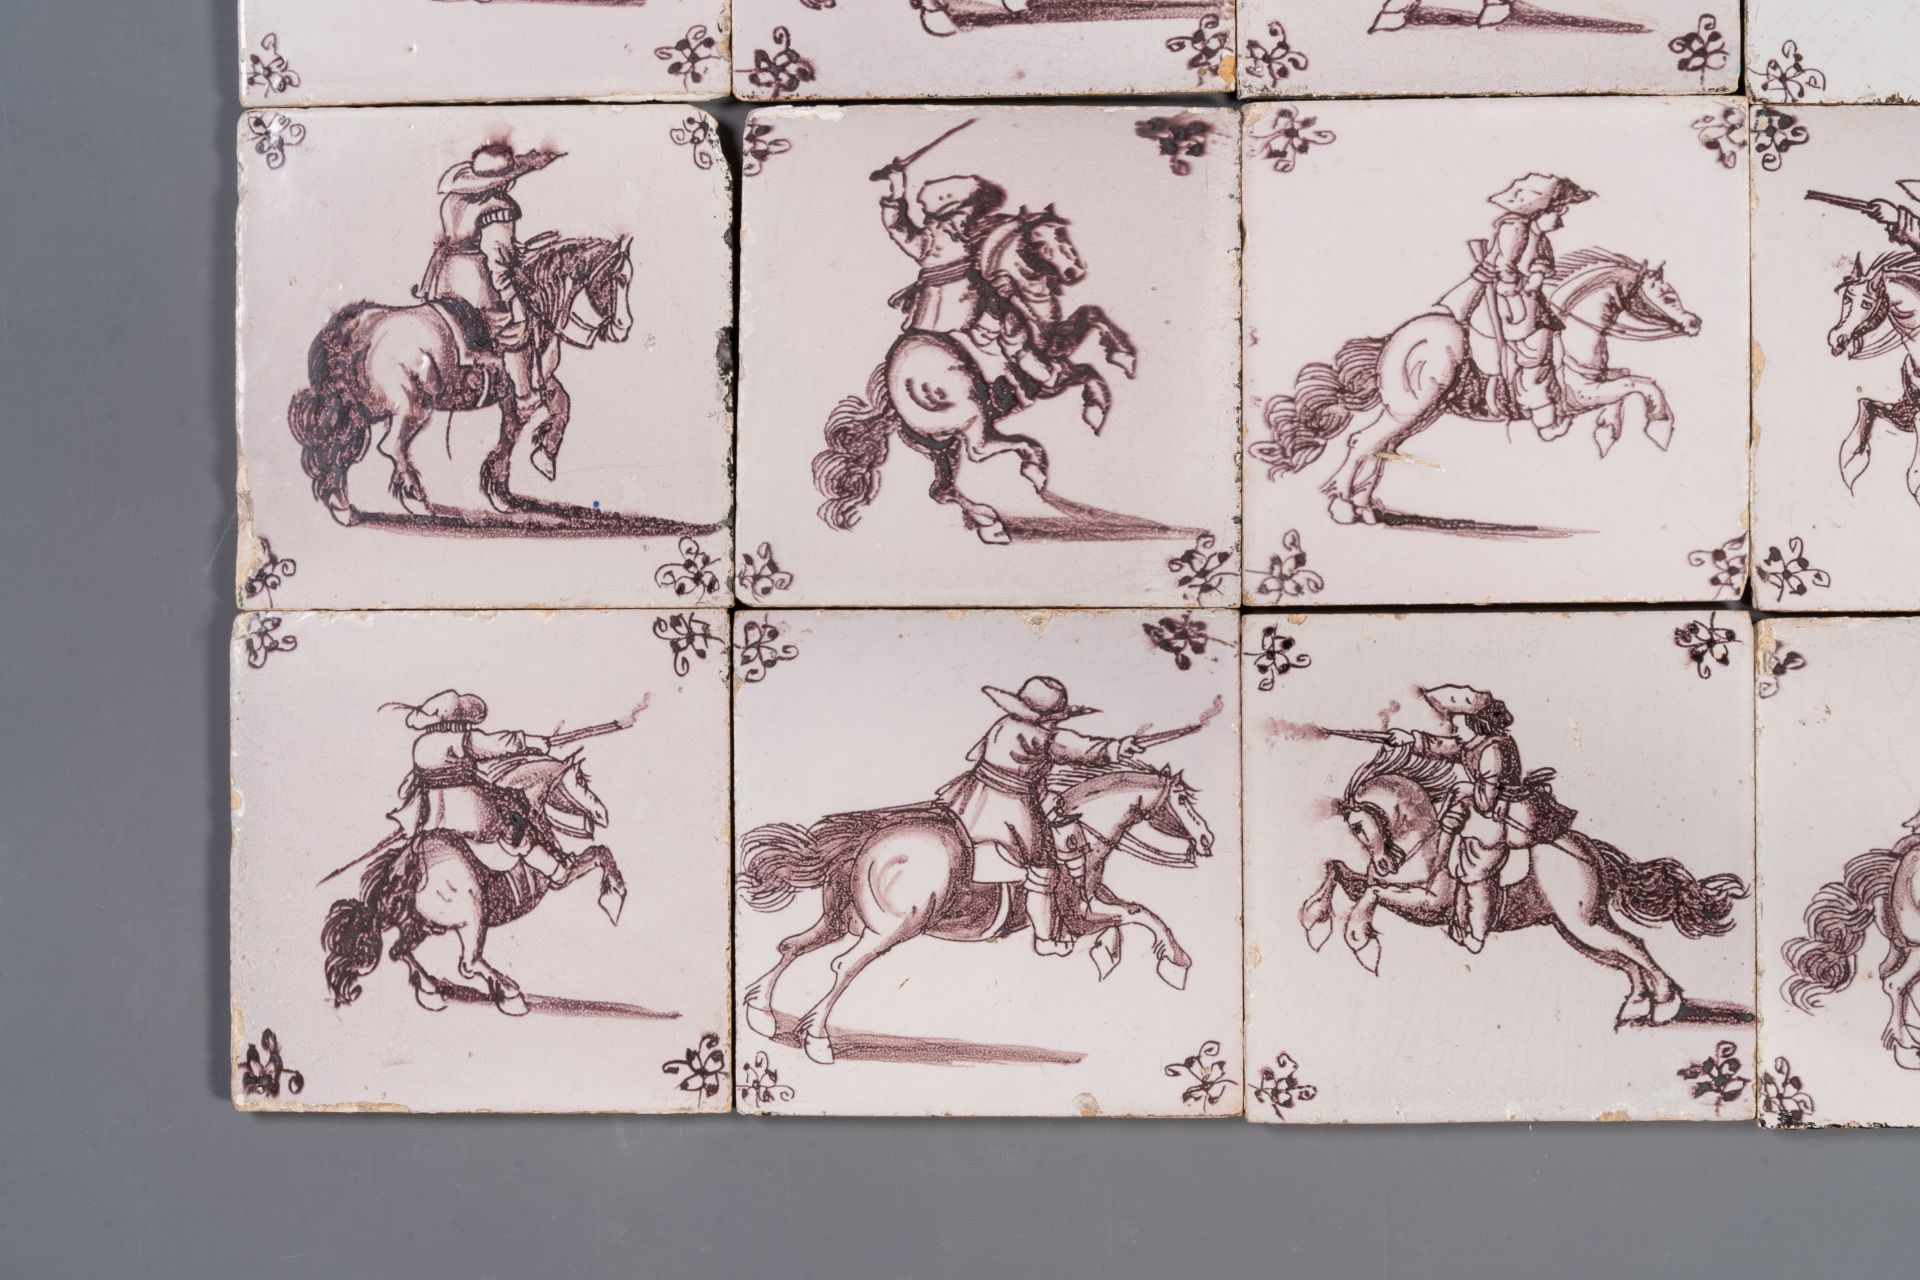 Fifteen Dutch Delft manganese tiles with horse riders, late 17th C. - Image 13 of 13